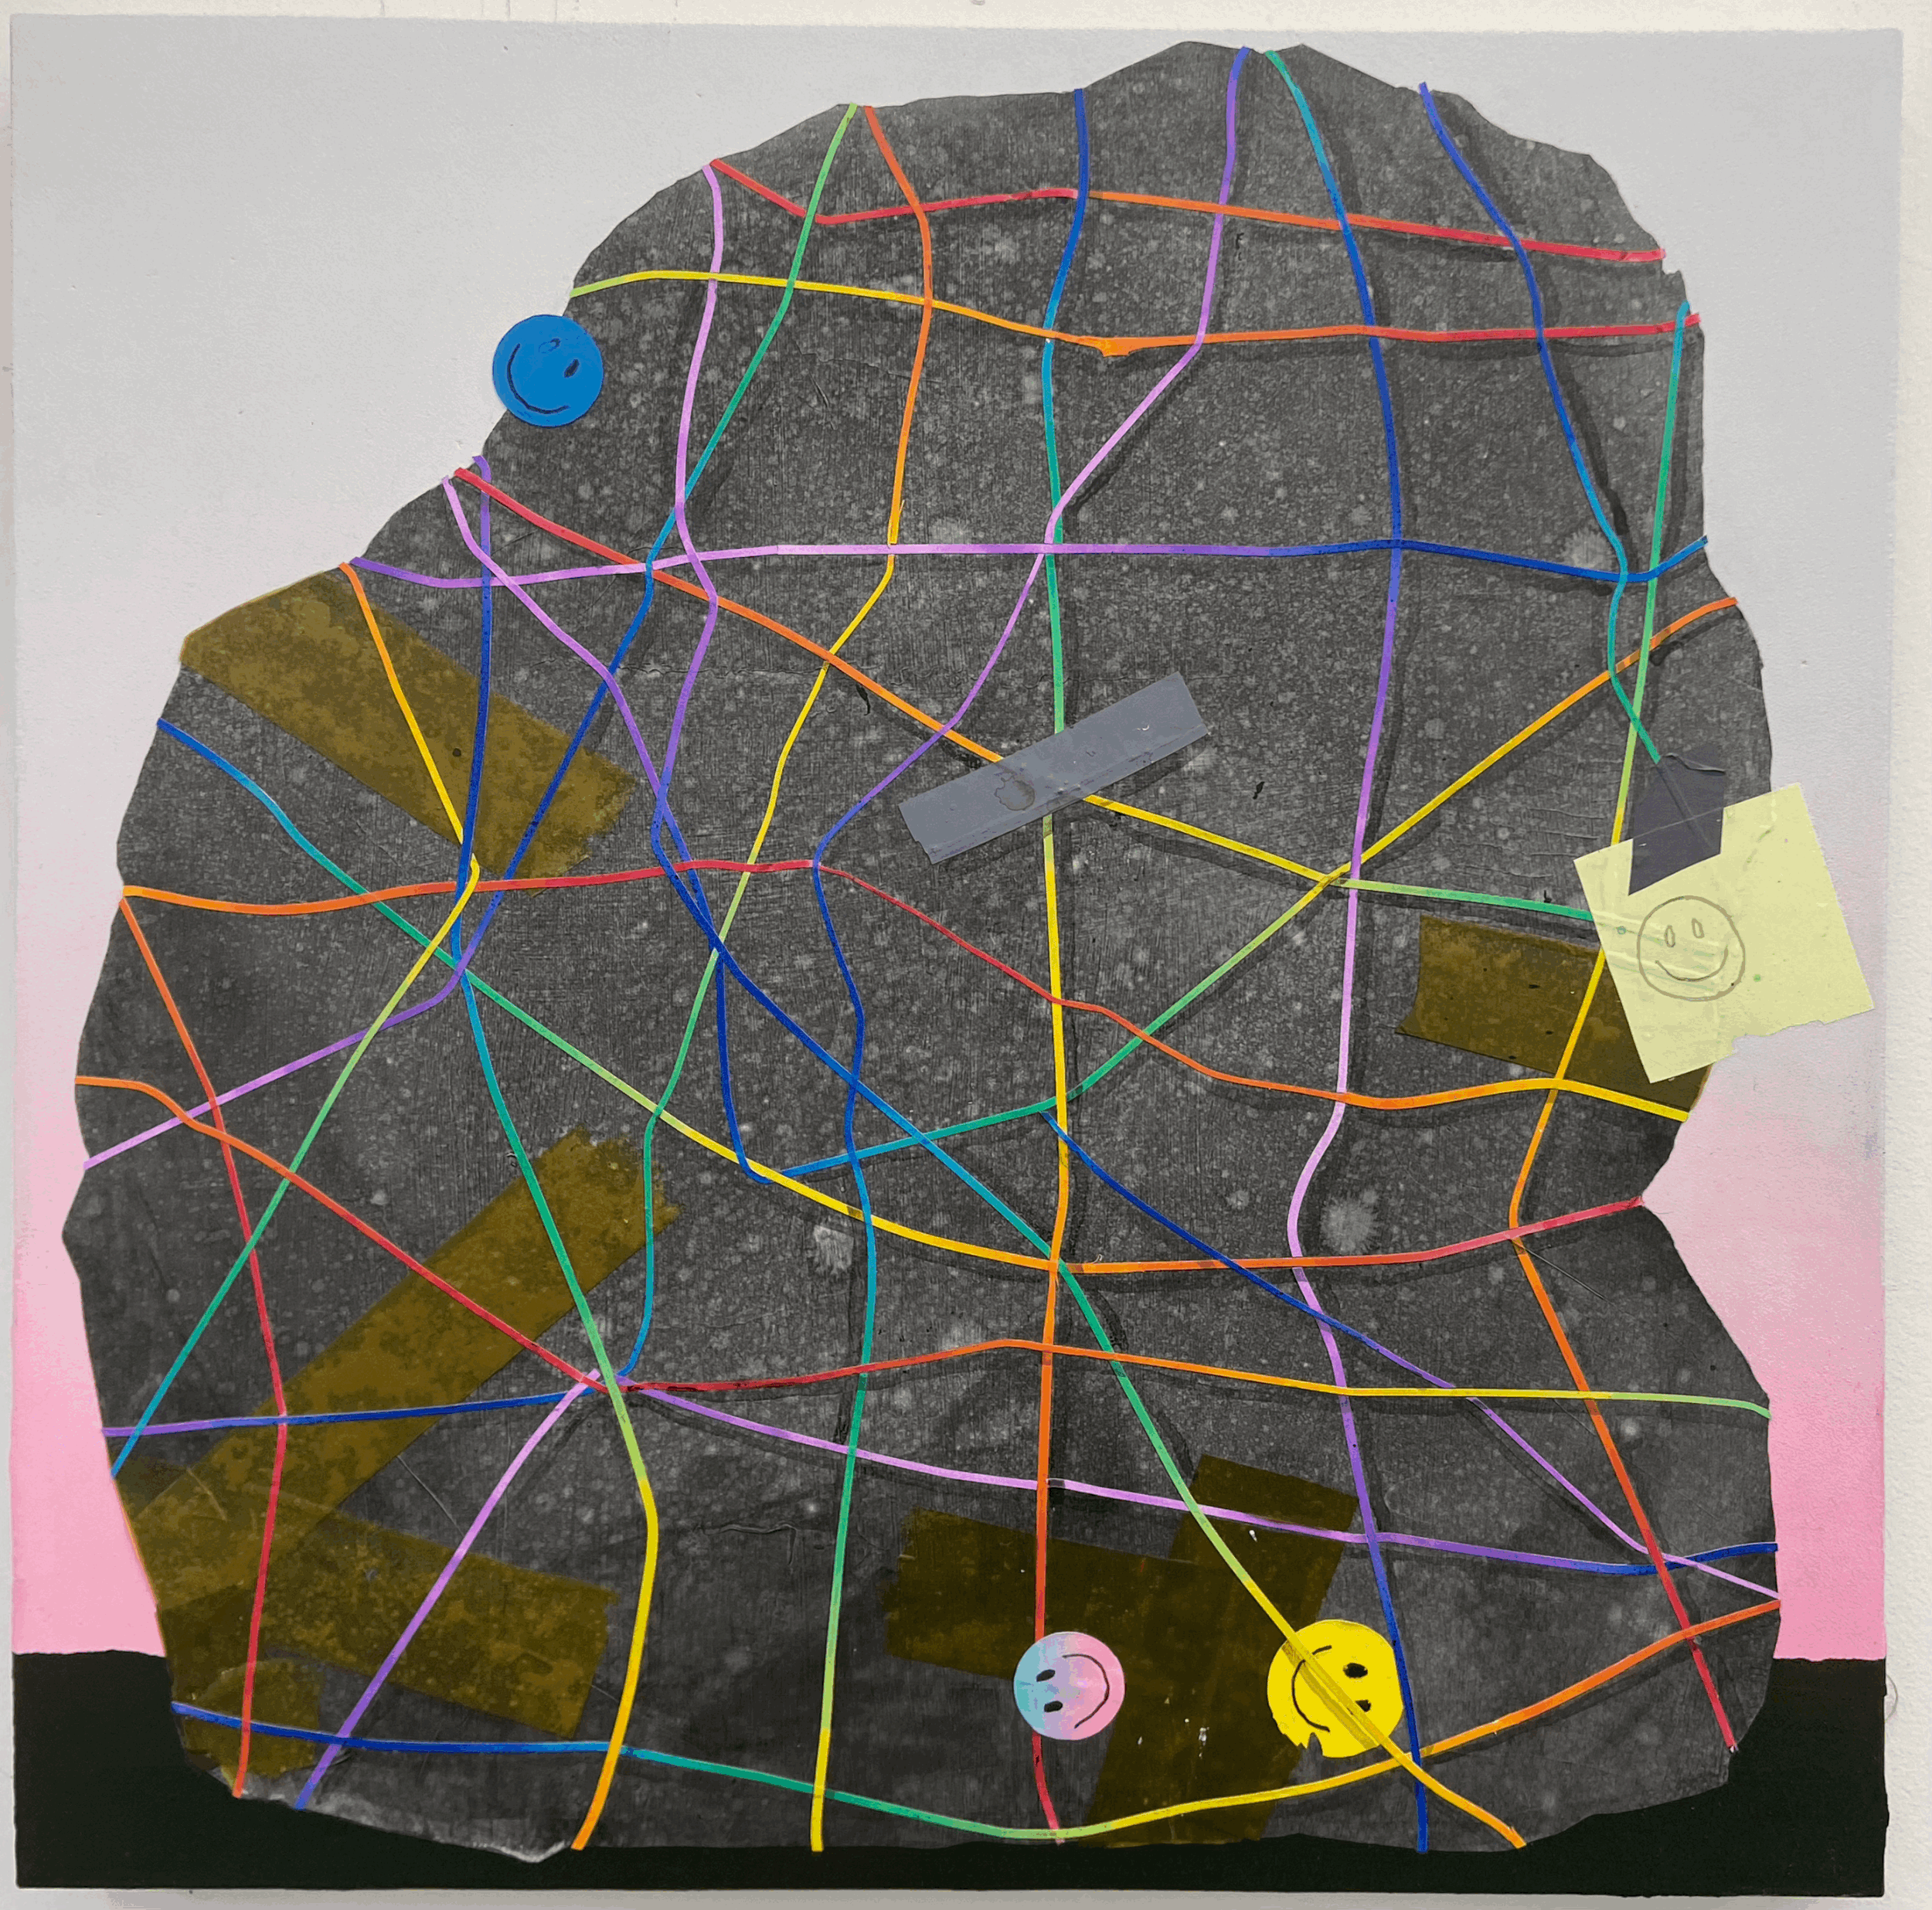 "A Happy Place". 2022. acrylic on linen over panel. 24" x 24"